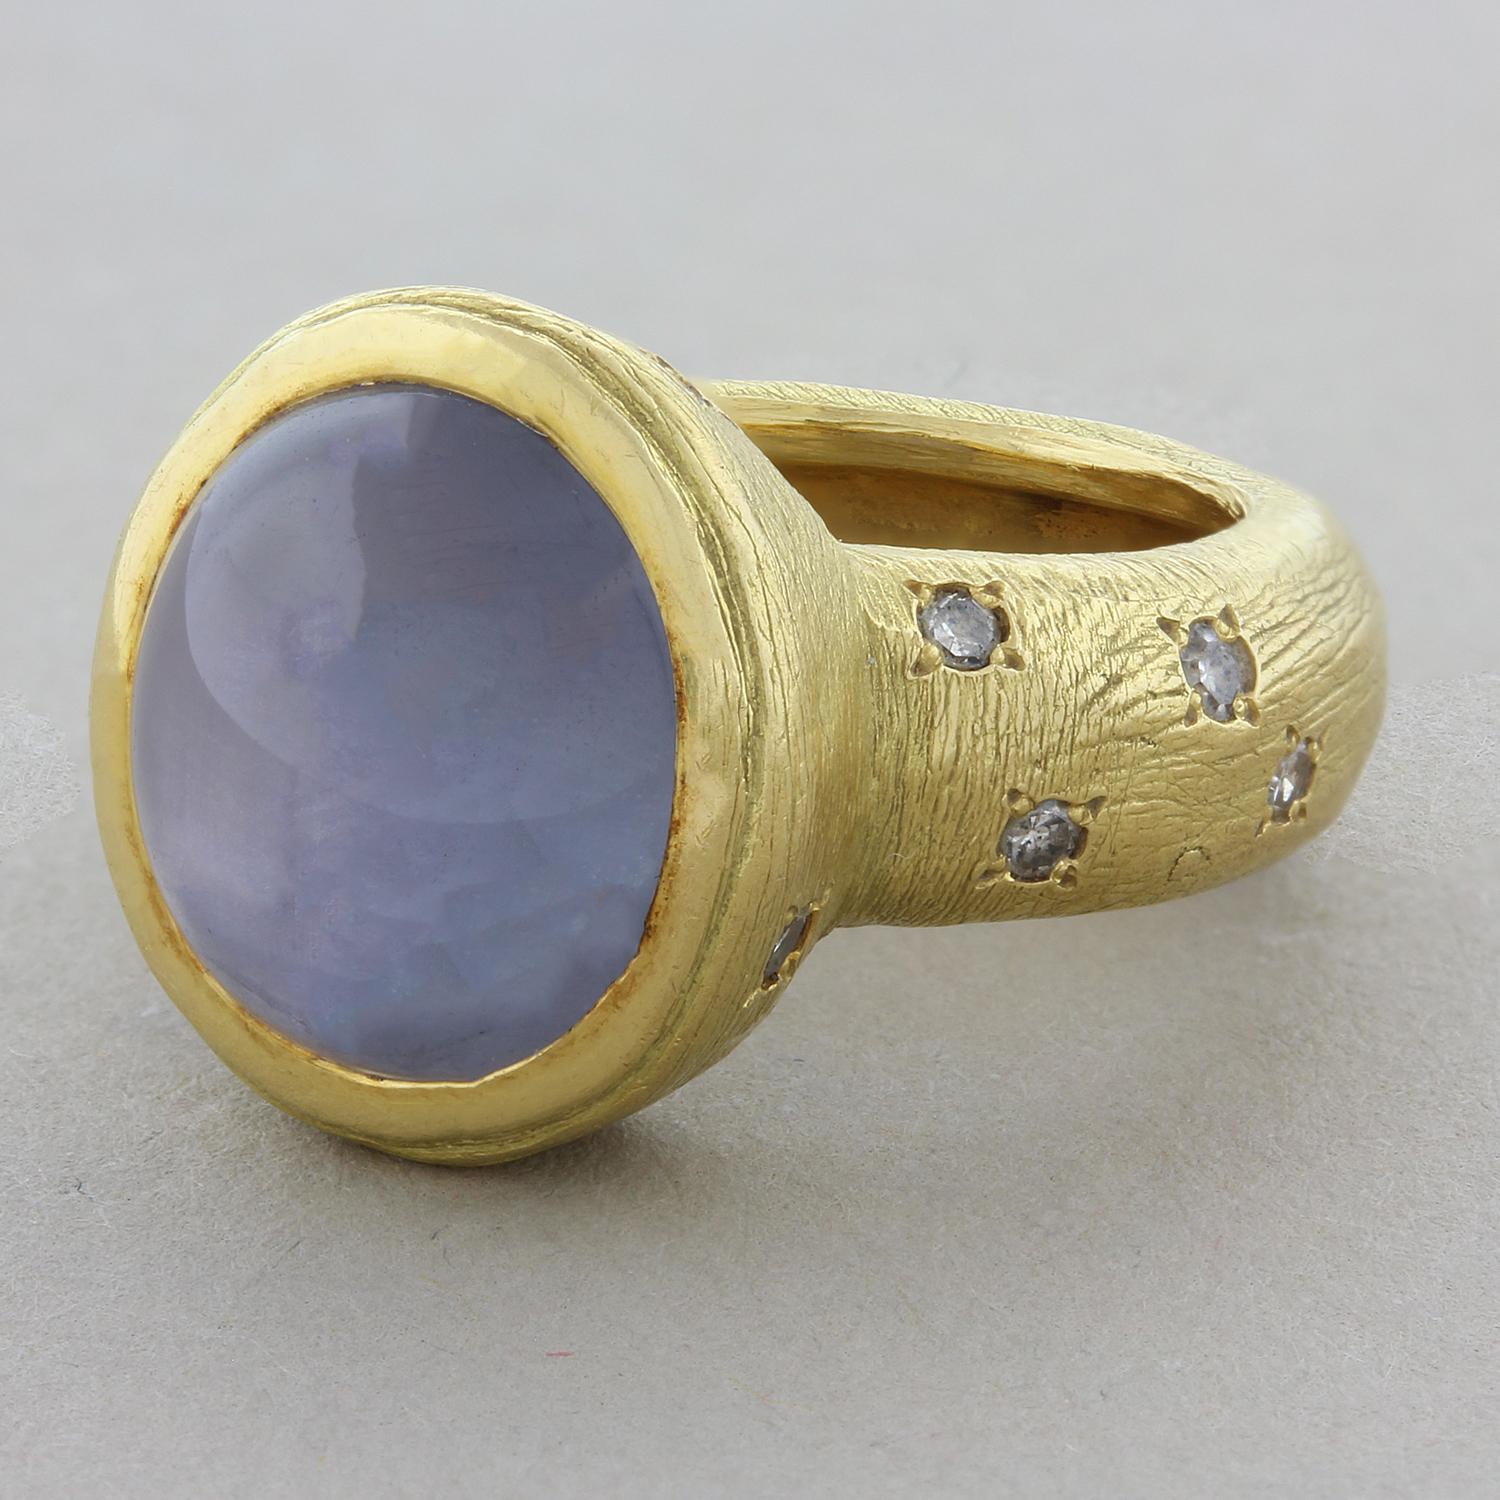 A delicately smooth 13.57 carat oval cabochon star sapphire is bezel set in this fun ring polka-dotted with 0.20 carats of diamonds. Set in 18K yellow gold with a textured finish.  

Ring Size: 4.75 (Sizable)
